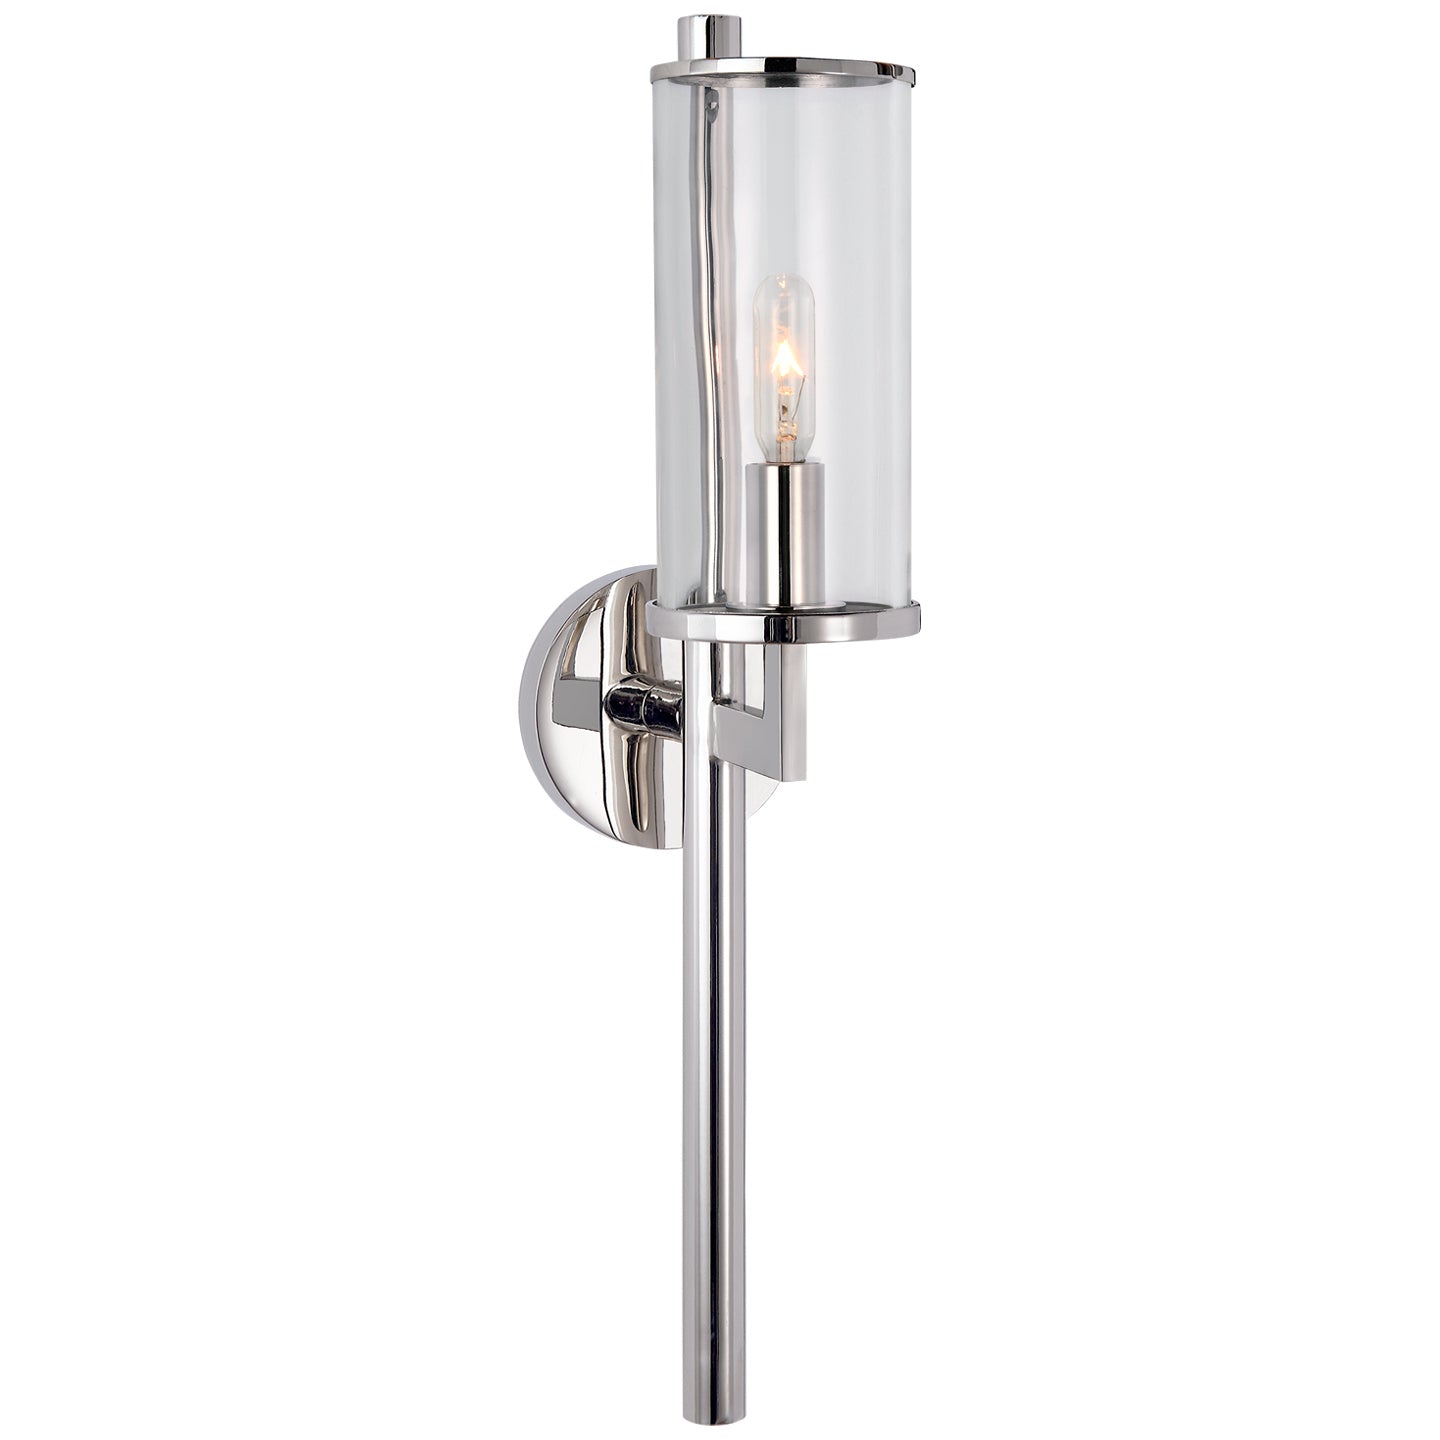 Load image into Gallery viewer, Visual Comfort Signature - KW 2200PN-CG - One Light Wall Sconce - Liaison - Polished Nickel
